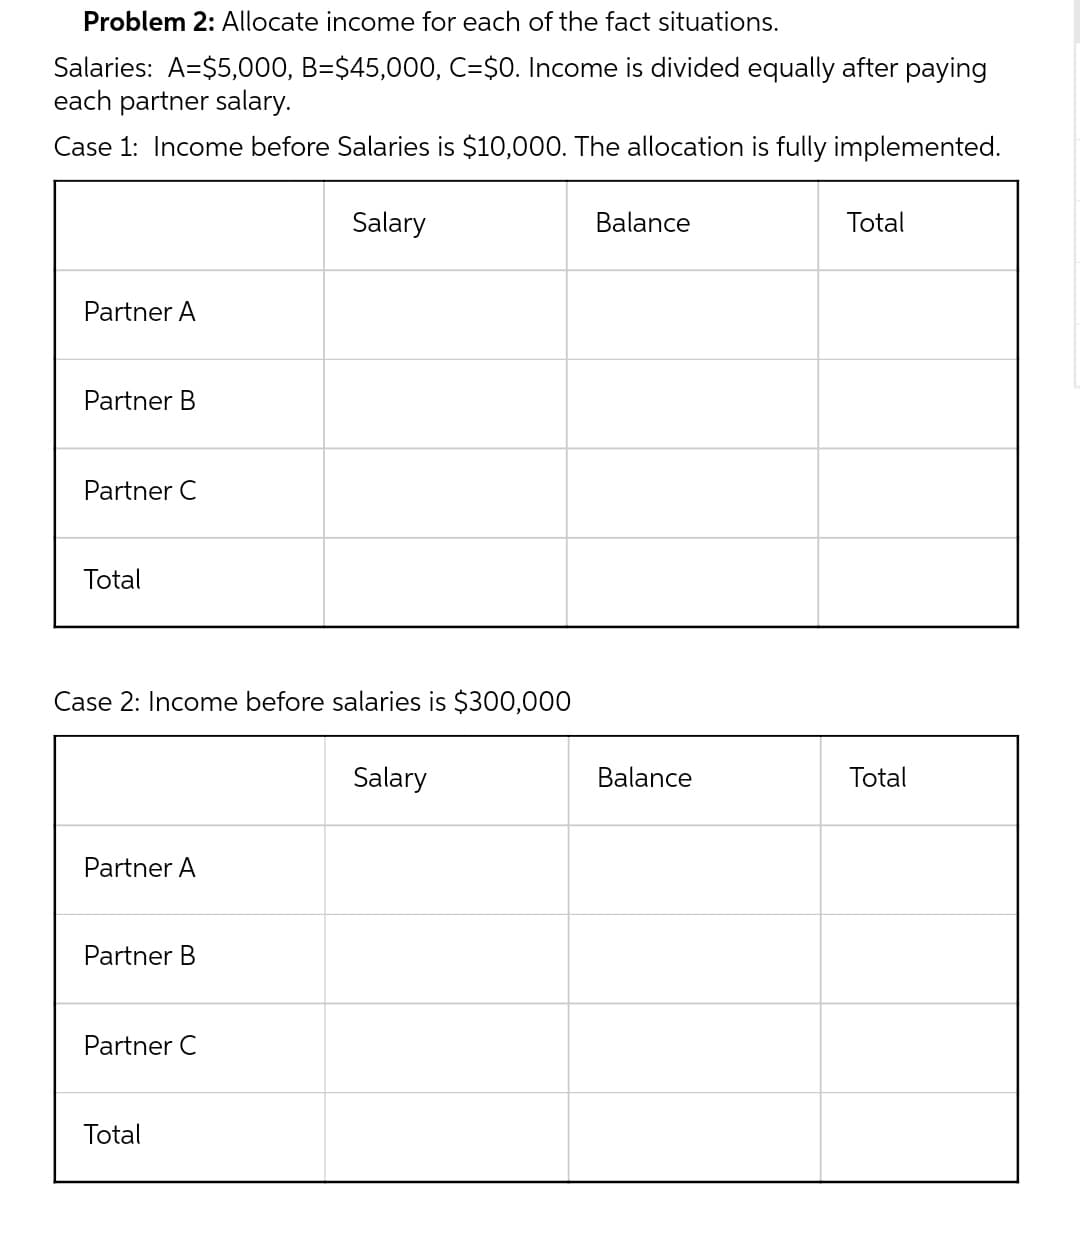 Problem 2: Allocate income for each of the fact situations.
Salaries: A=$5,000, B=$45,000, C=$0. Income is divided equally after paying
each partner salary.
Case 1: Income before Salaries is $10,000. The allocation is fully implemented.
Salary
Partner A
Partner B
Partner C
Total
Case 2: Income before salaries is $300,000
Partner A
Partner B
Partner C
Total
Salary
Balance
Balance
Total
Total